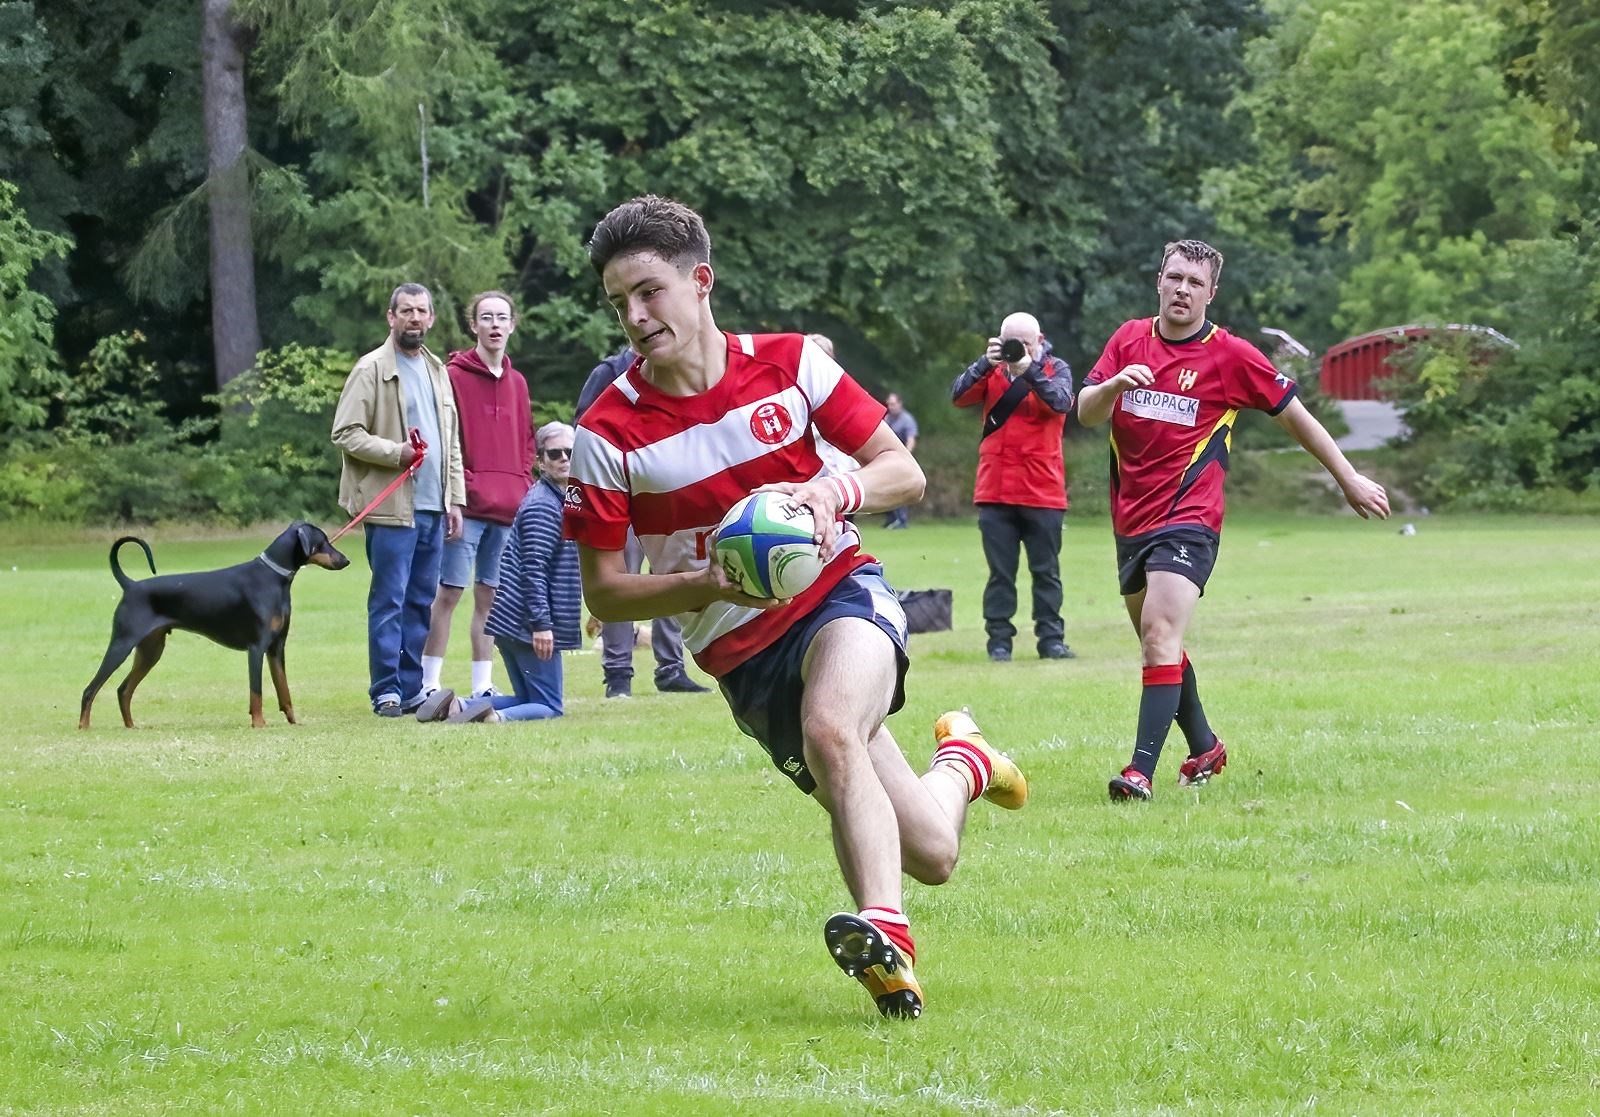 Rory Millar races clear to score another try. Photo: John MacGregor.